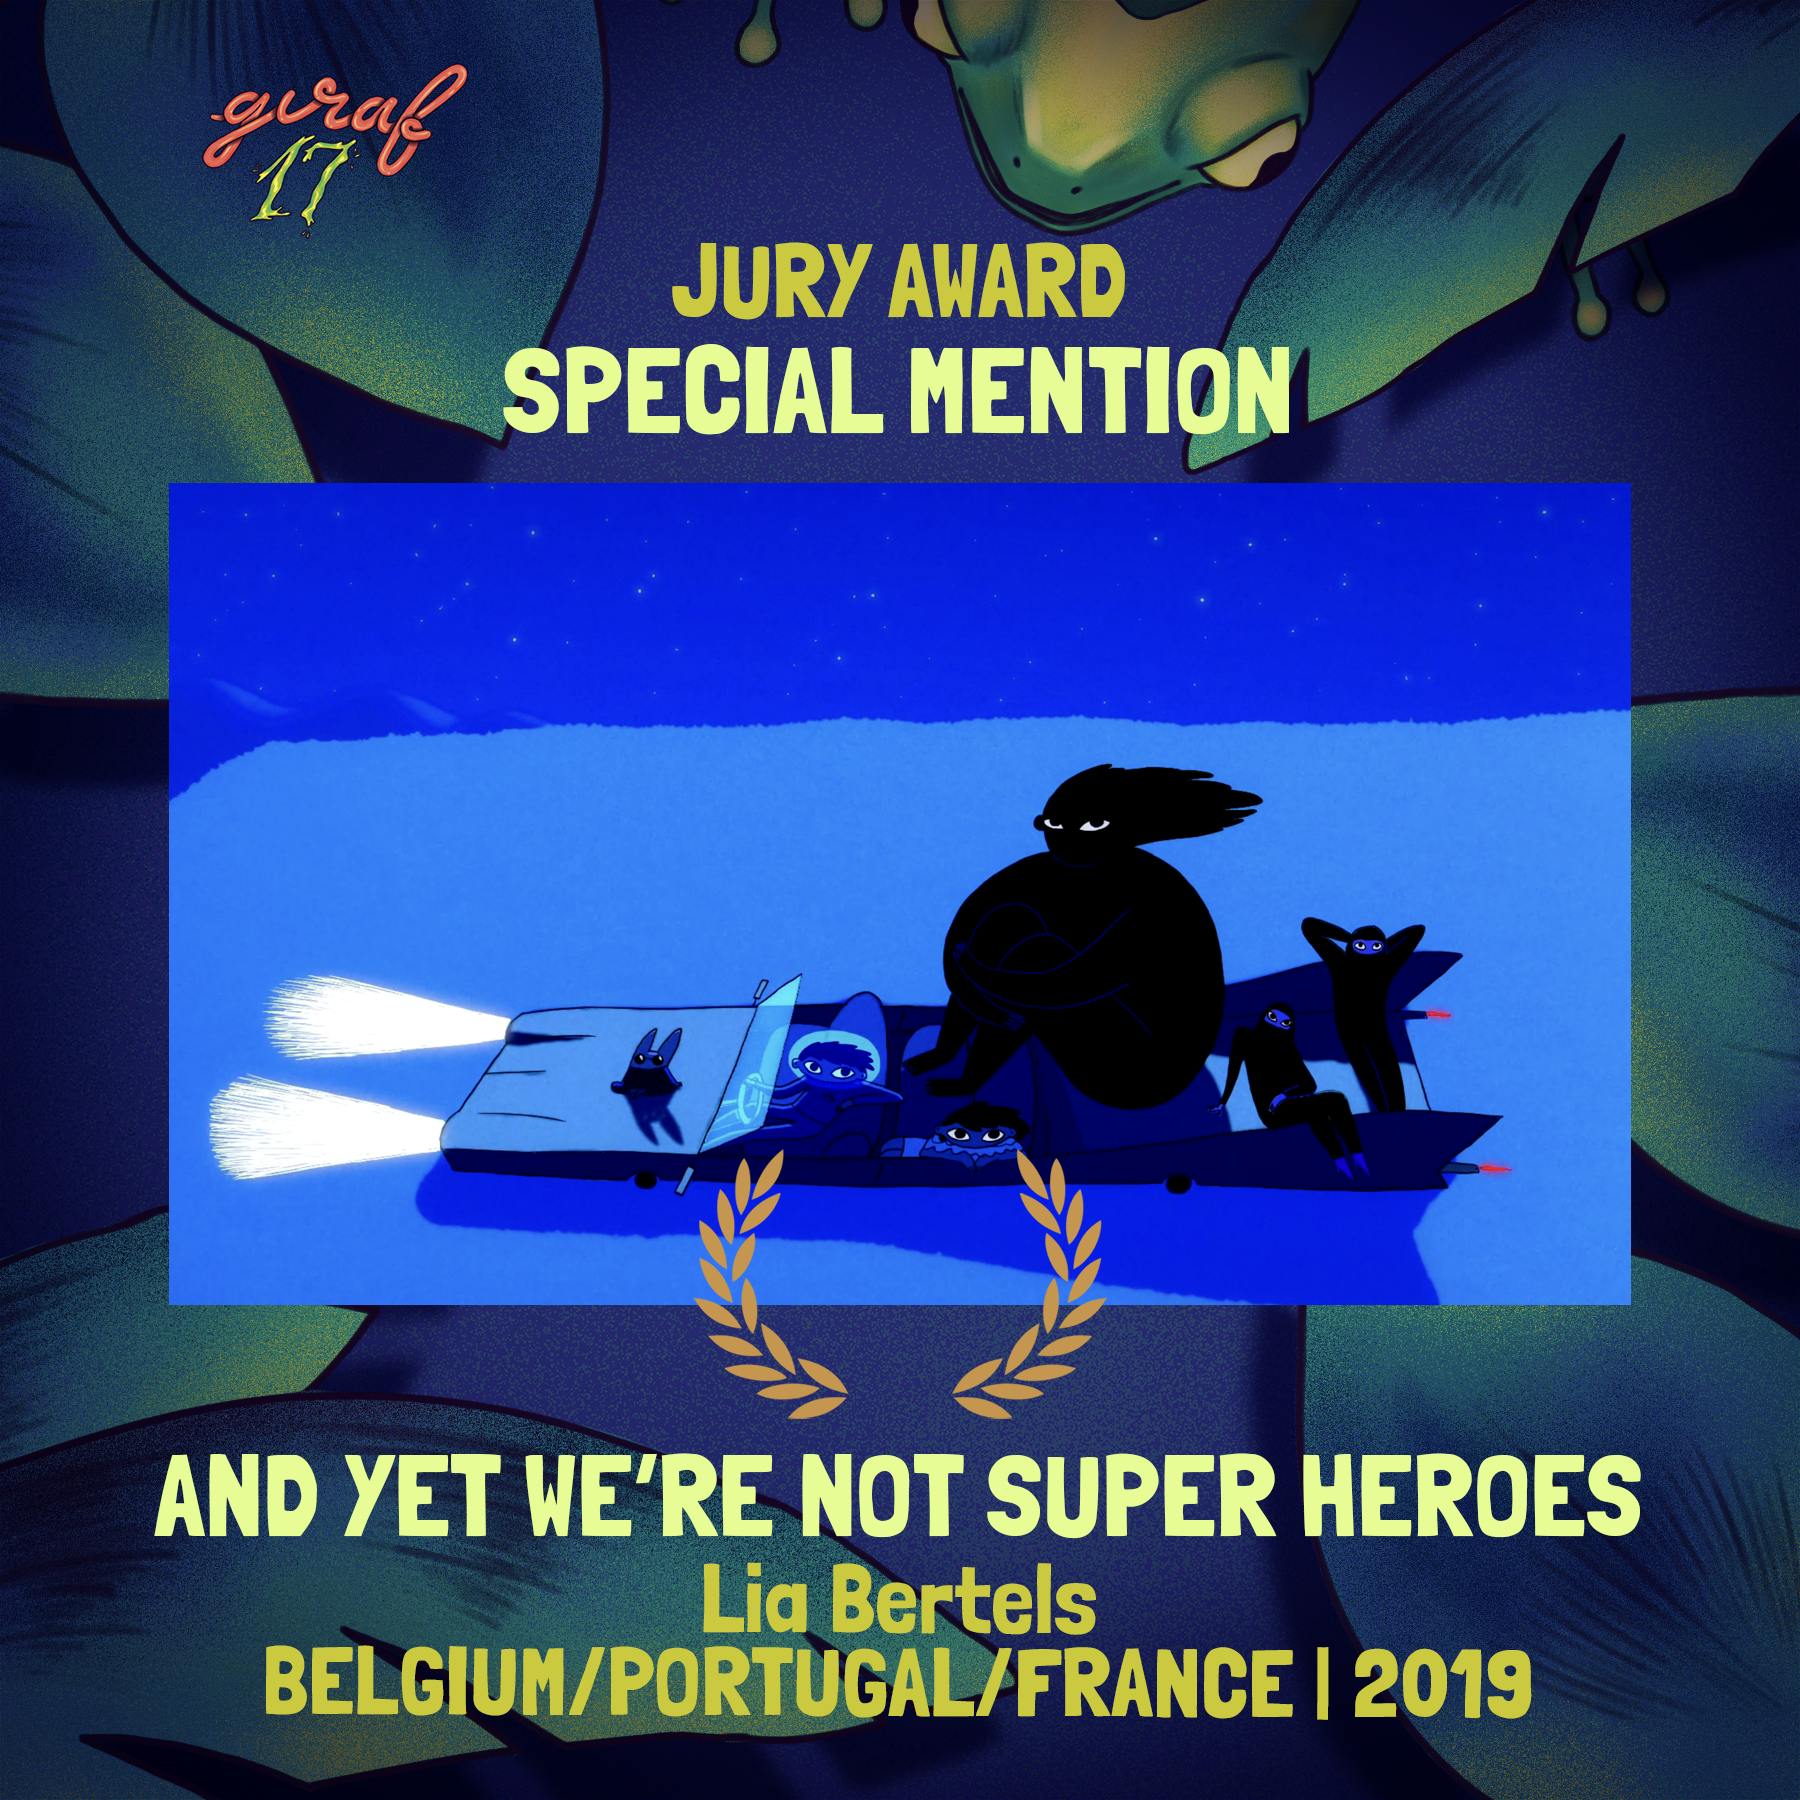 Several silhouetted figures of varying sizes sit in a very large convertible. Surrounding text: GIRAF17 Jury Award; Special Mention; And Yet We're Not Super Heroes; Lia Bertels; Belgium/Portugal/France; 2019